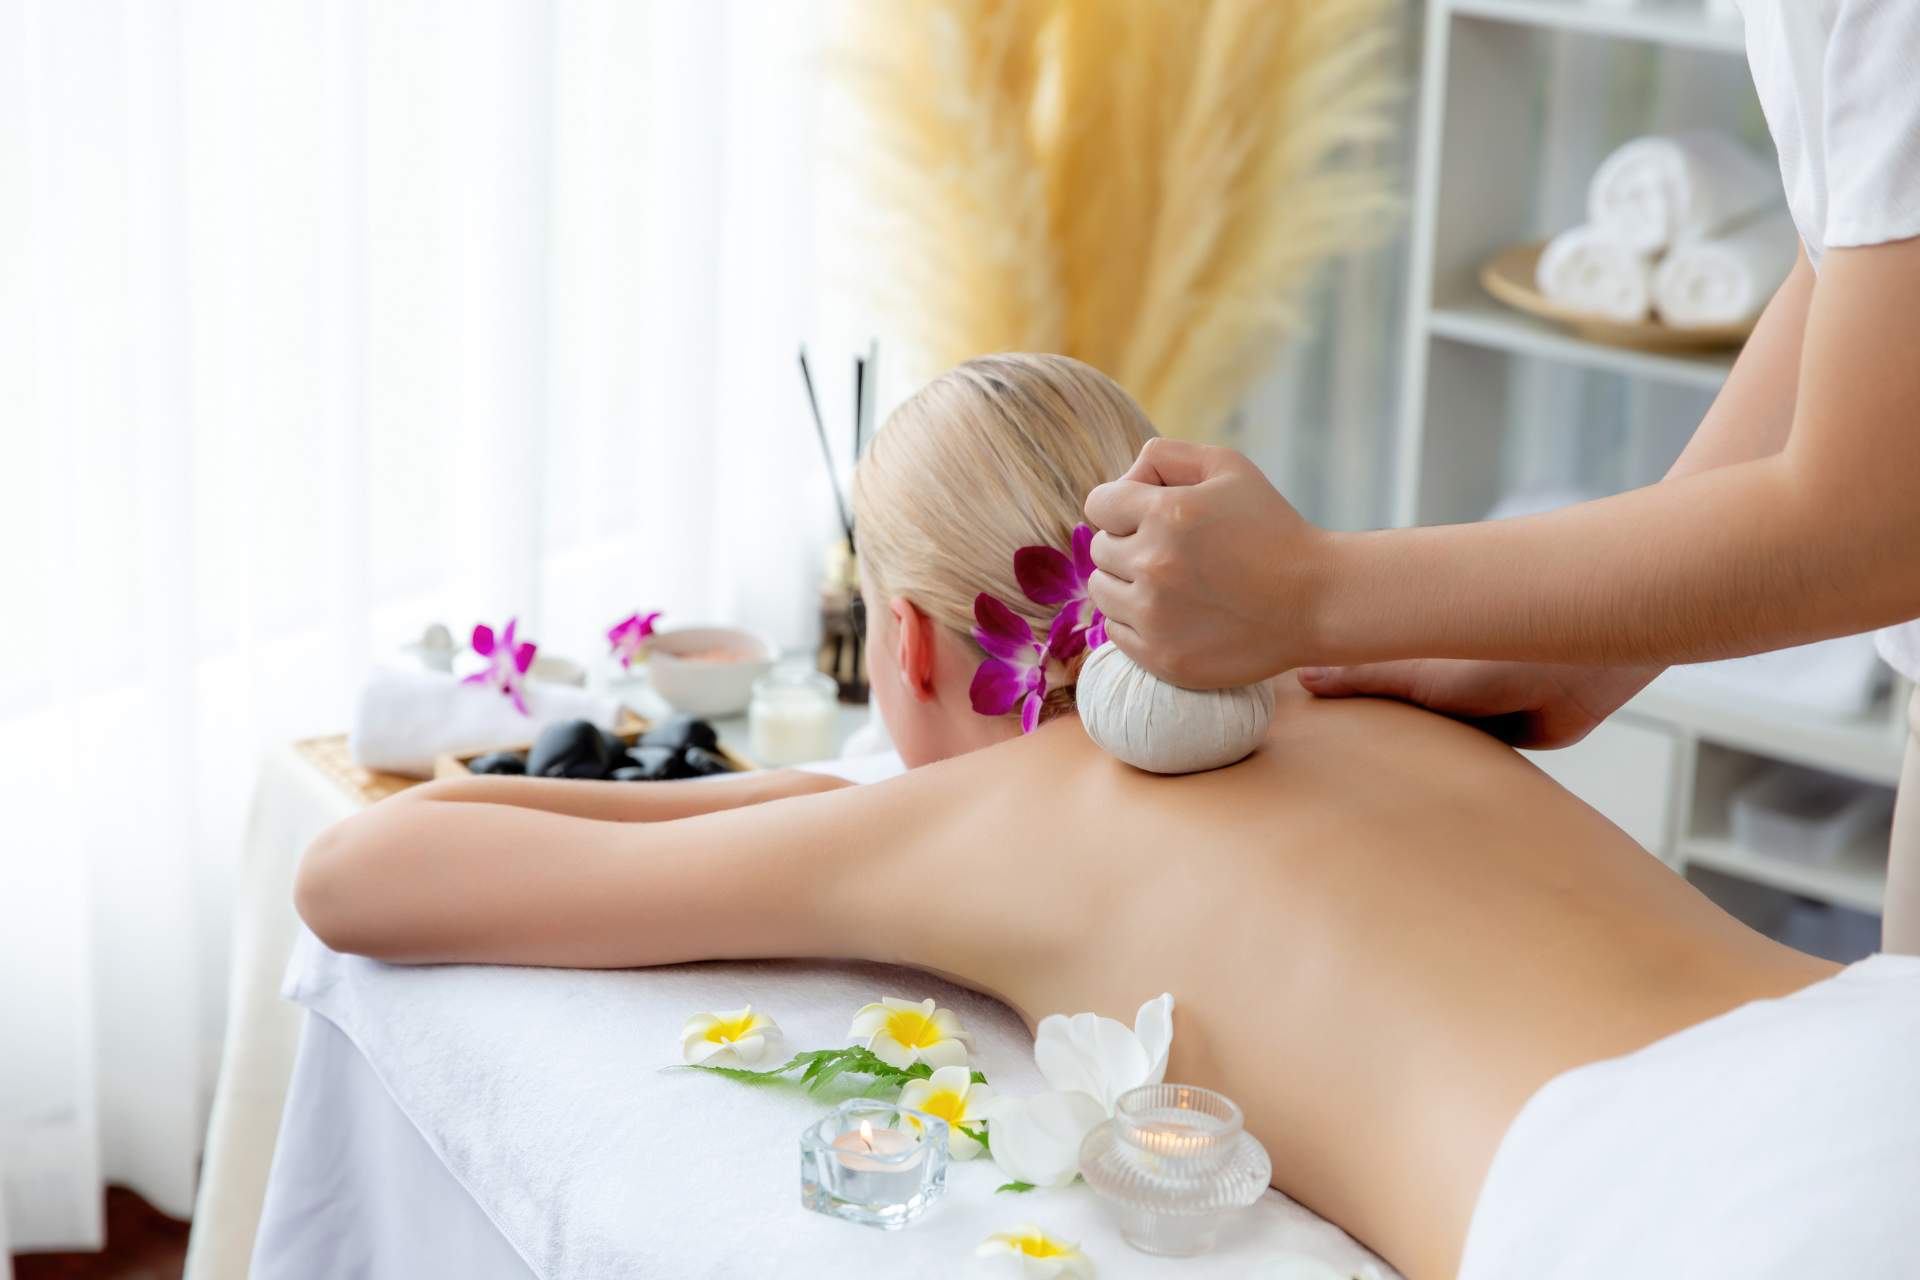 5 Compelling Reasons to Choose Face Body Day SPA Services This Holiday Season